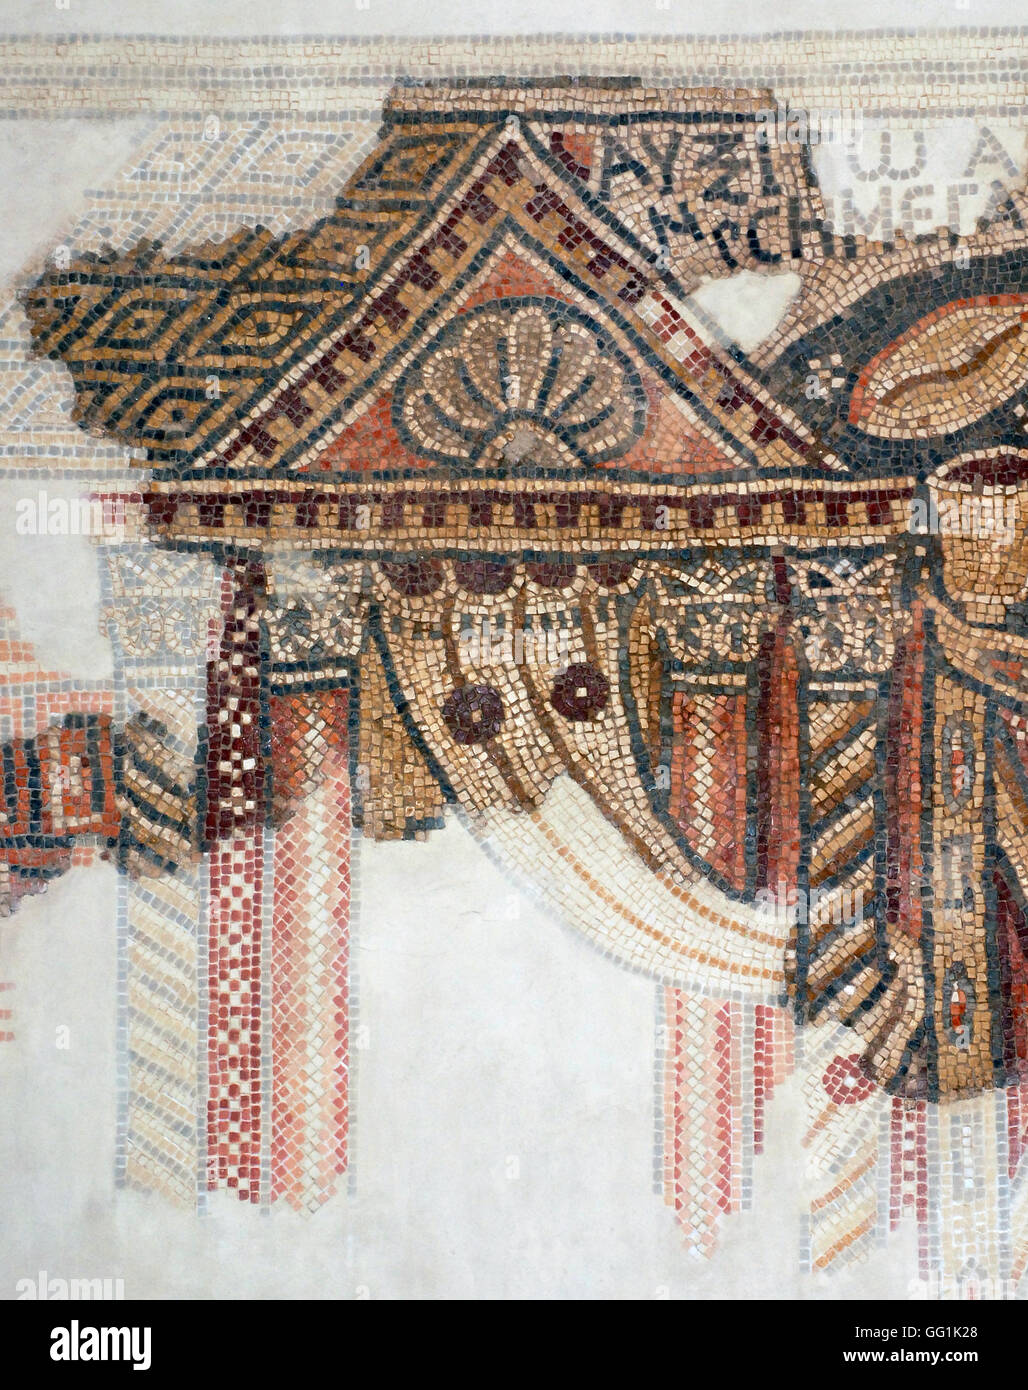 5892. El-Khirbe Samaritan synagogue (Samaria) dating from the 4th. C. AD. Detail of the mosaic floor depicting the Ark in the wi Stock Photo